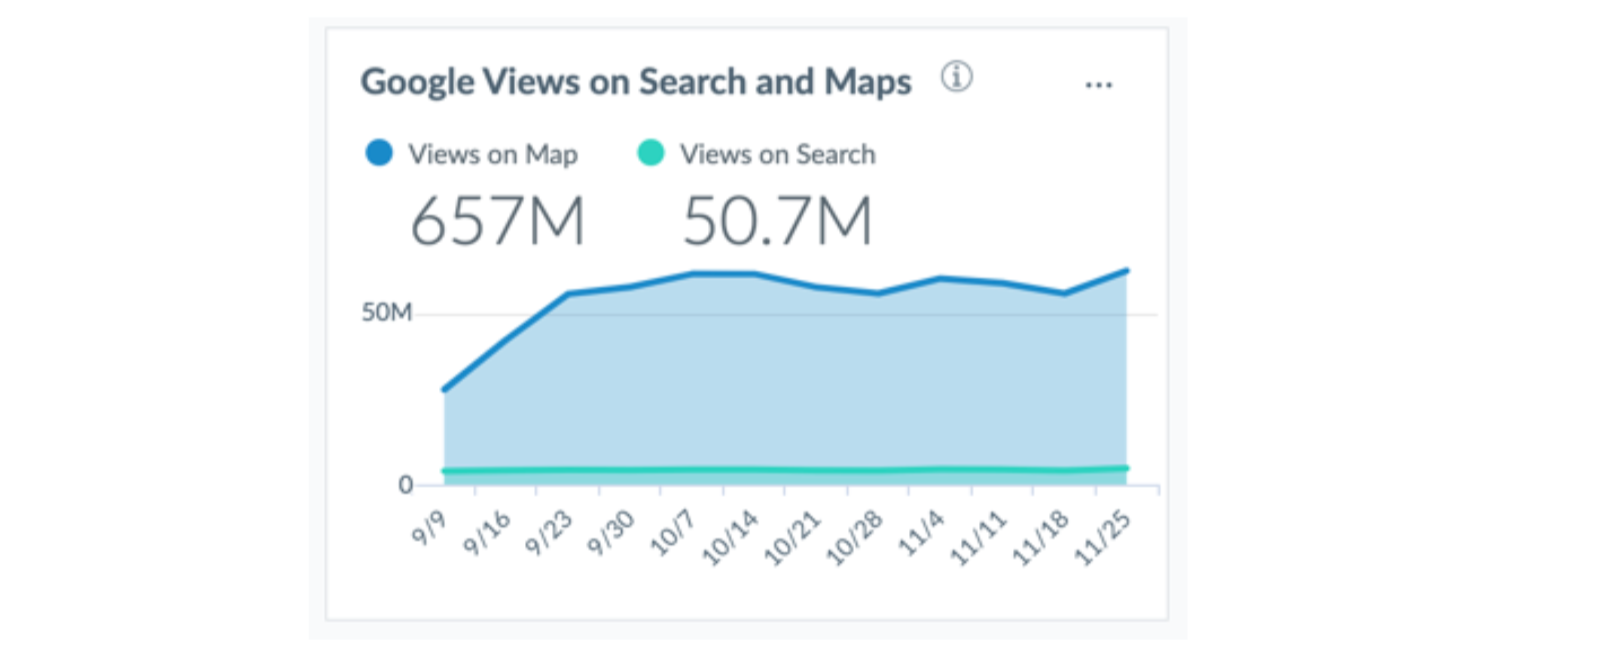 google views on search and map metric